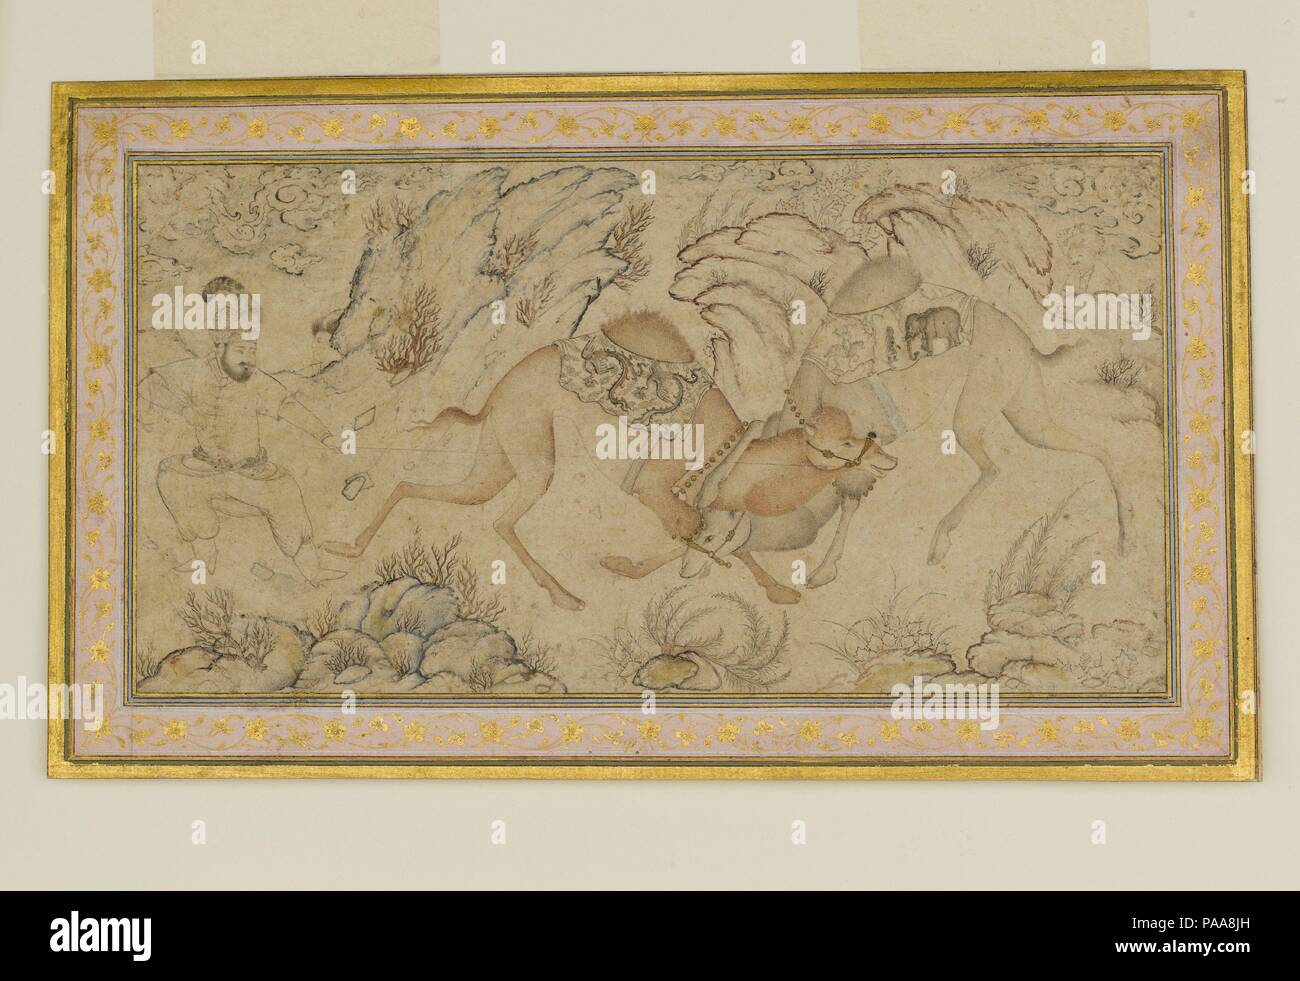 Two Camels Fighting. Dimensions: Painting: H. 4 1/8 in. (10.5 cm)   W. 7 7/8 in. (20 cm)  Page: H. 5 1/2 in. (14 cm)   W. 9 1/4 in. (23.5 cm)  Mat: H. 14 1/4 in. (36.2 cm)   W. 19 1/4 in. (48.9 cm). Date: late 16th-early 17th century.  The depiction of two camels fighting has a long history in Iranian art, stretching back to pre-Islamic times, and was popular in Persian and Mughal painting from the late fifteenth century onward. In this drawing, a man in a cap with a large feather tries to separate one camel from the other. Both camels are draped with ornate saddle blankets, one of which is de Stock Photo